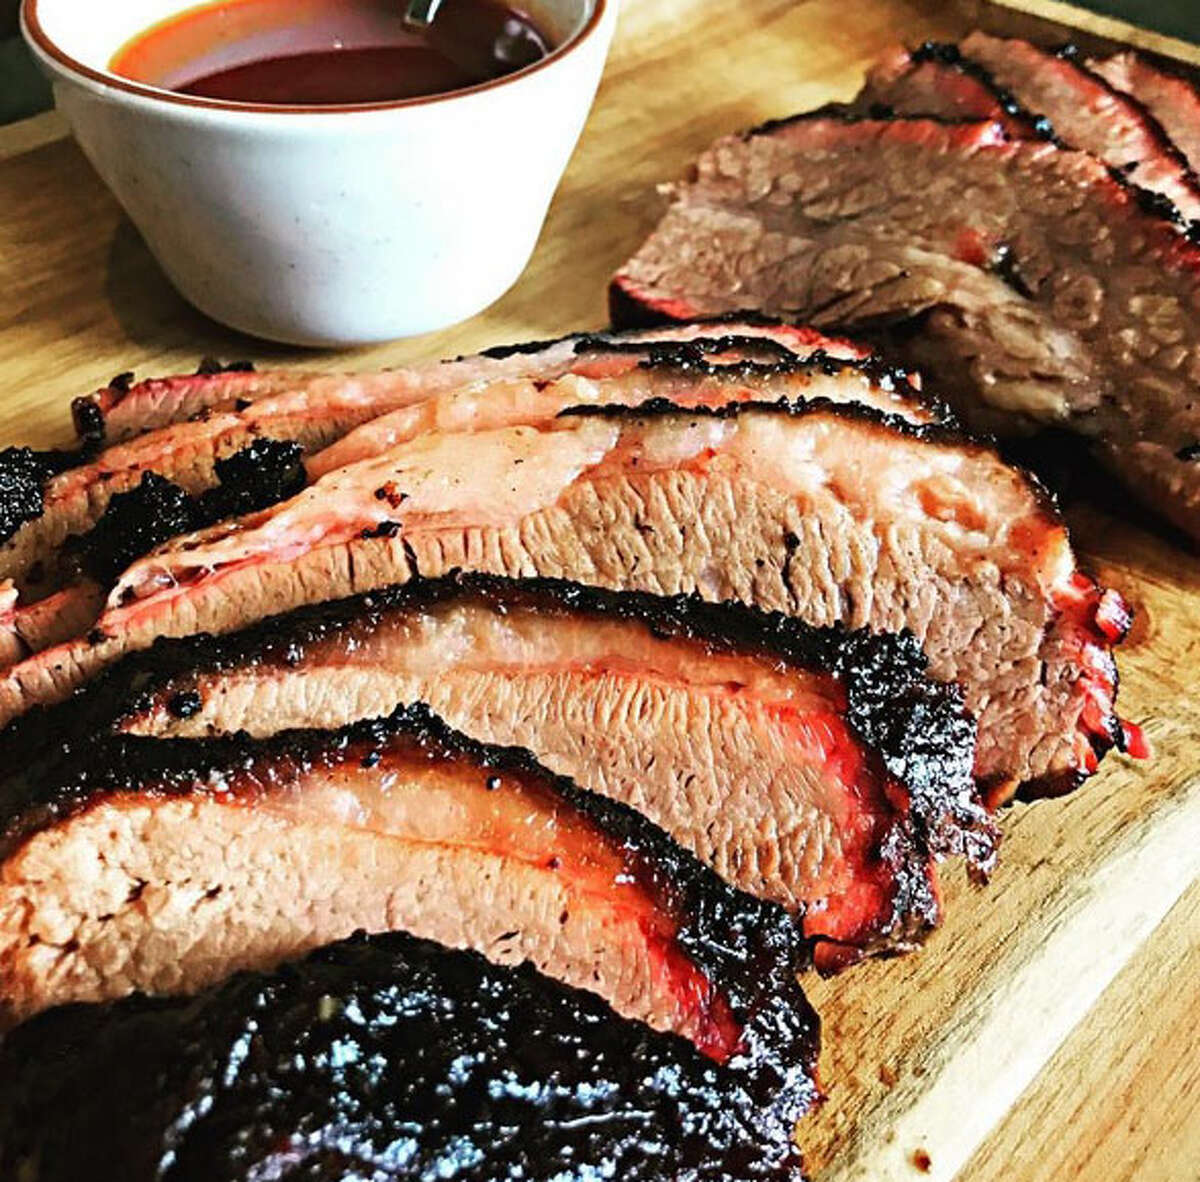 Smoked brisket from the Ellis Brothers BBQ pop-up.